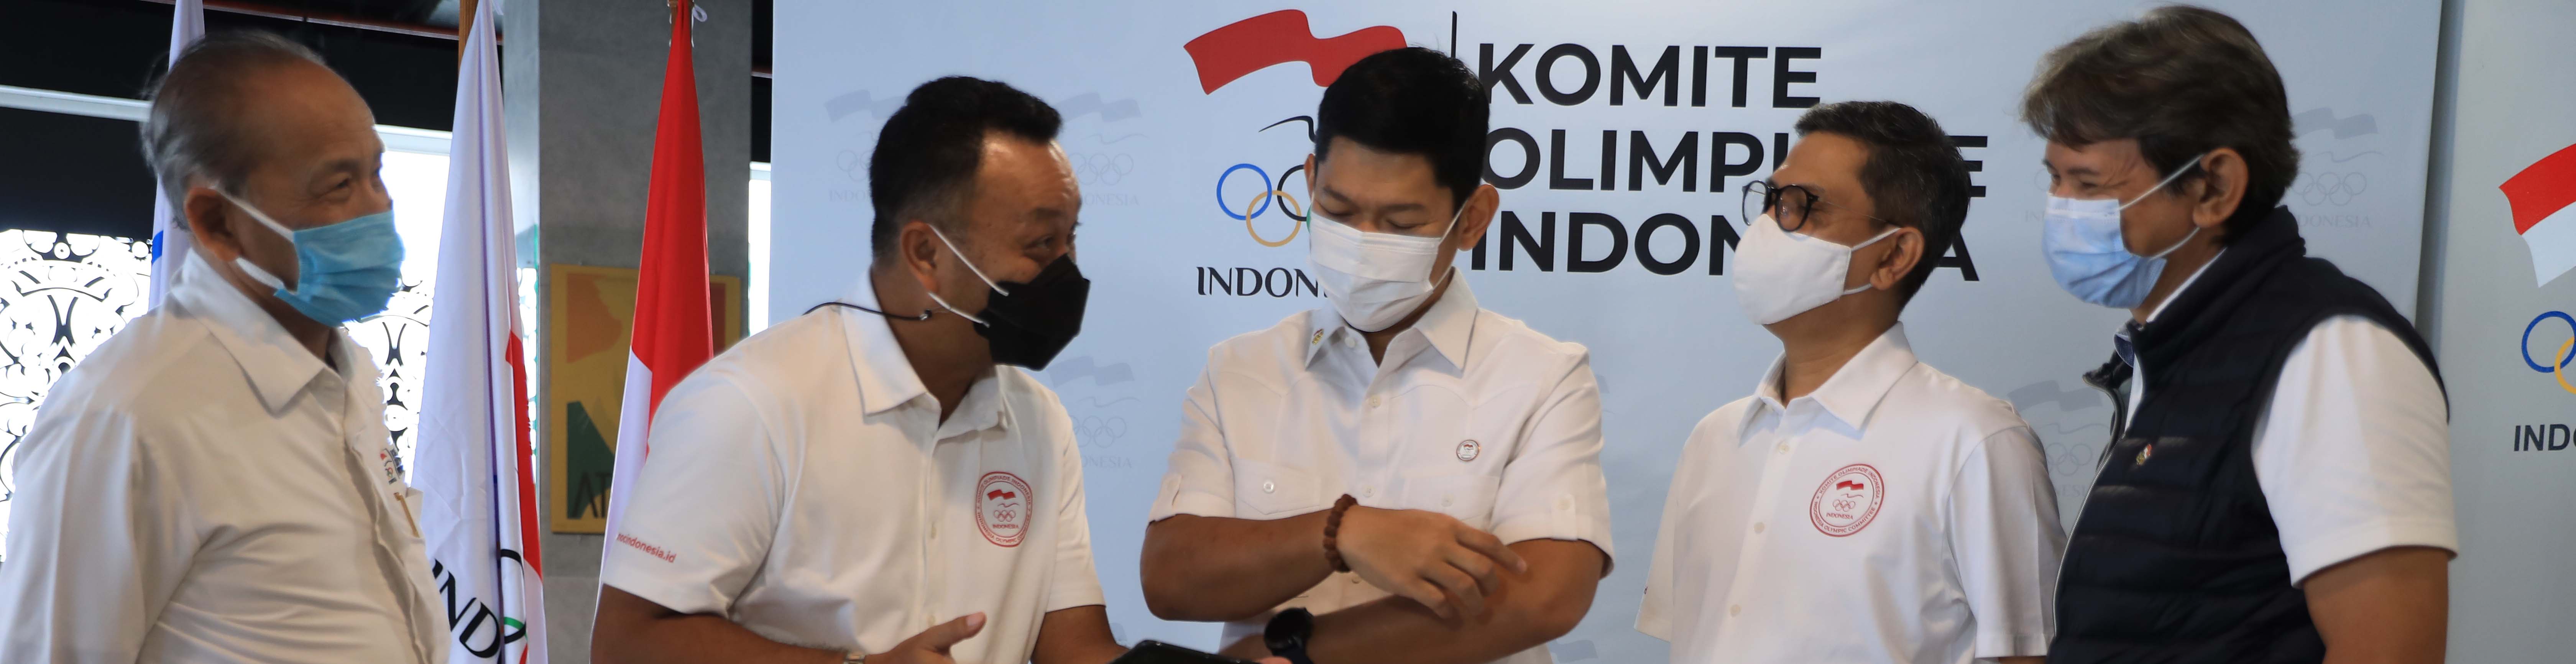 Indonesia Olympic Commitee - NOC Indonesia to Push for Medals Hope Sports in SEAGF Meeting